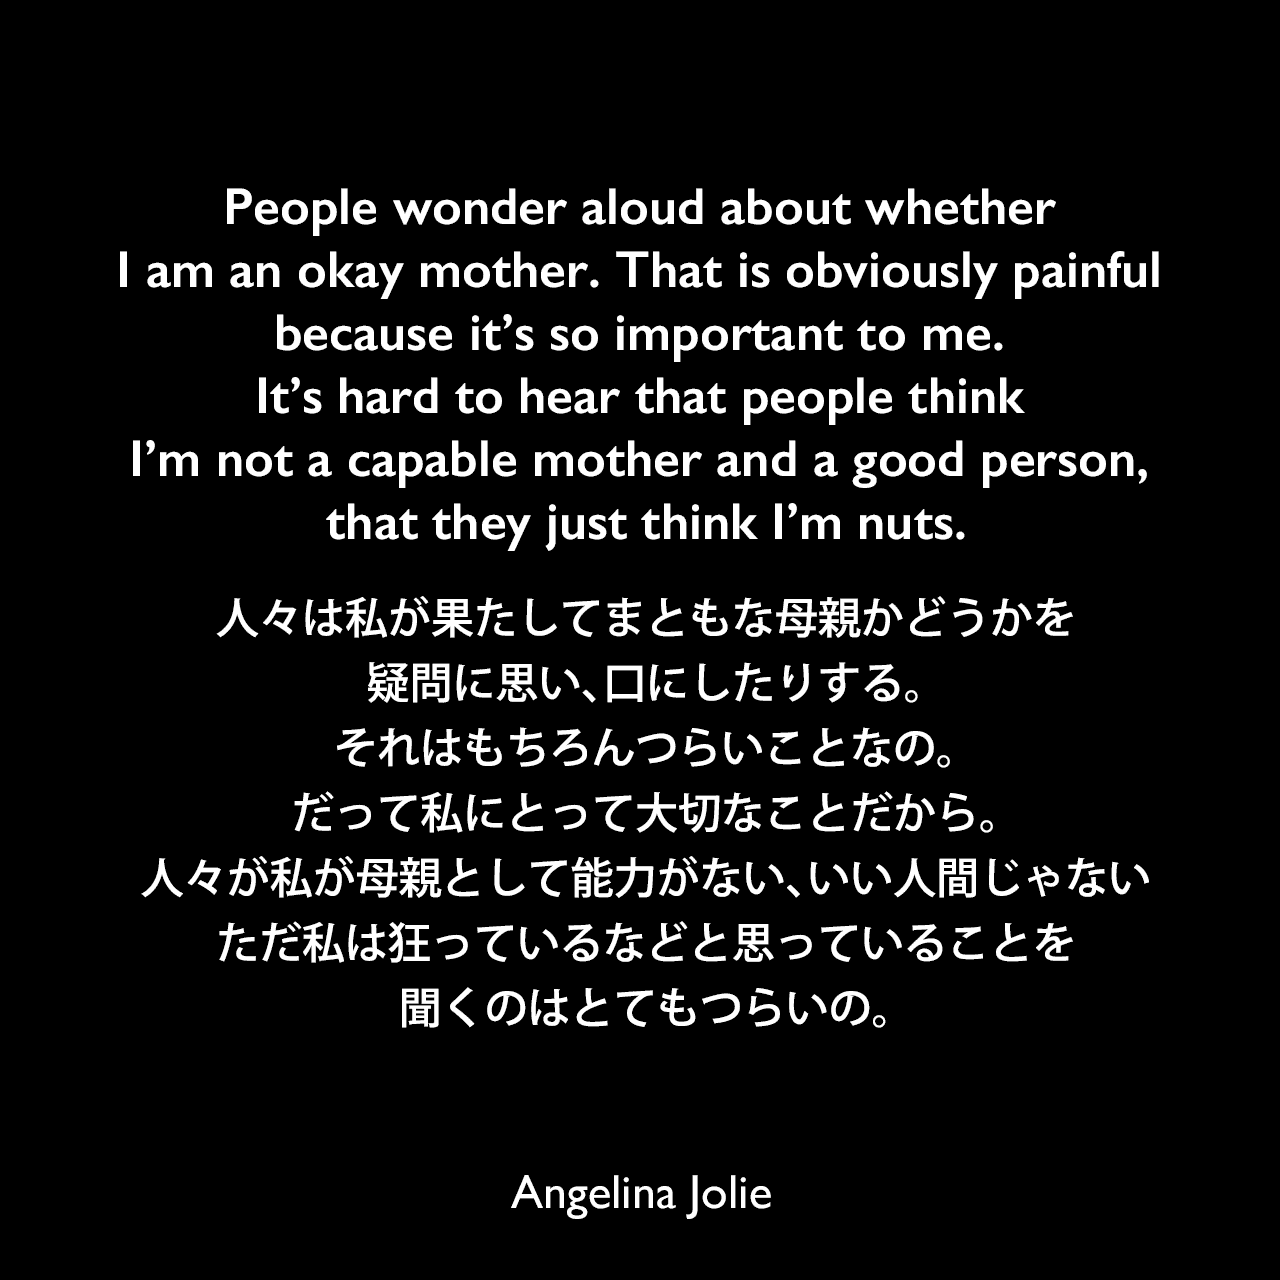 People wonder aloud about whether I am an okay mother. That is obviously painful because it’s so important to me. It’s hard to hear that people think I’m not a capable mother and a good person, that they just think I’m nuts.人々は私が果たしてまともな母親かどうかを疑問に思い、口にしたりする。それはもちろんつらいことなの。だって私にとって大切なことだから。人々が私が母親として能力がない、いい人間じゃない、ただ私は狂っているなどと思っていることを聞くのはとてもつらいの。Angelina Jolie